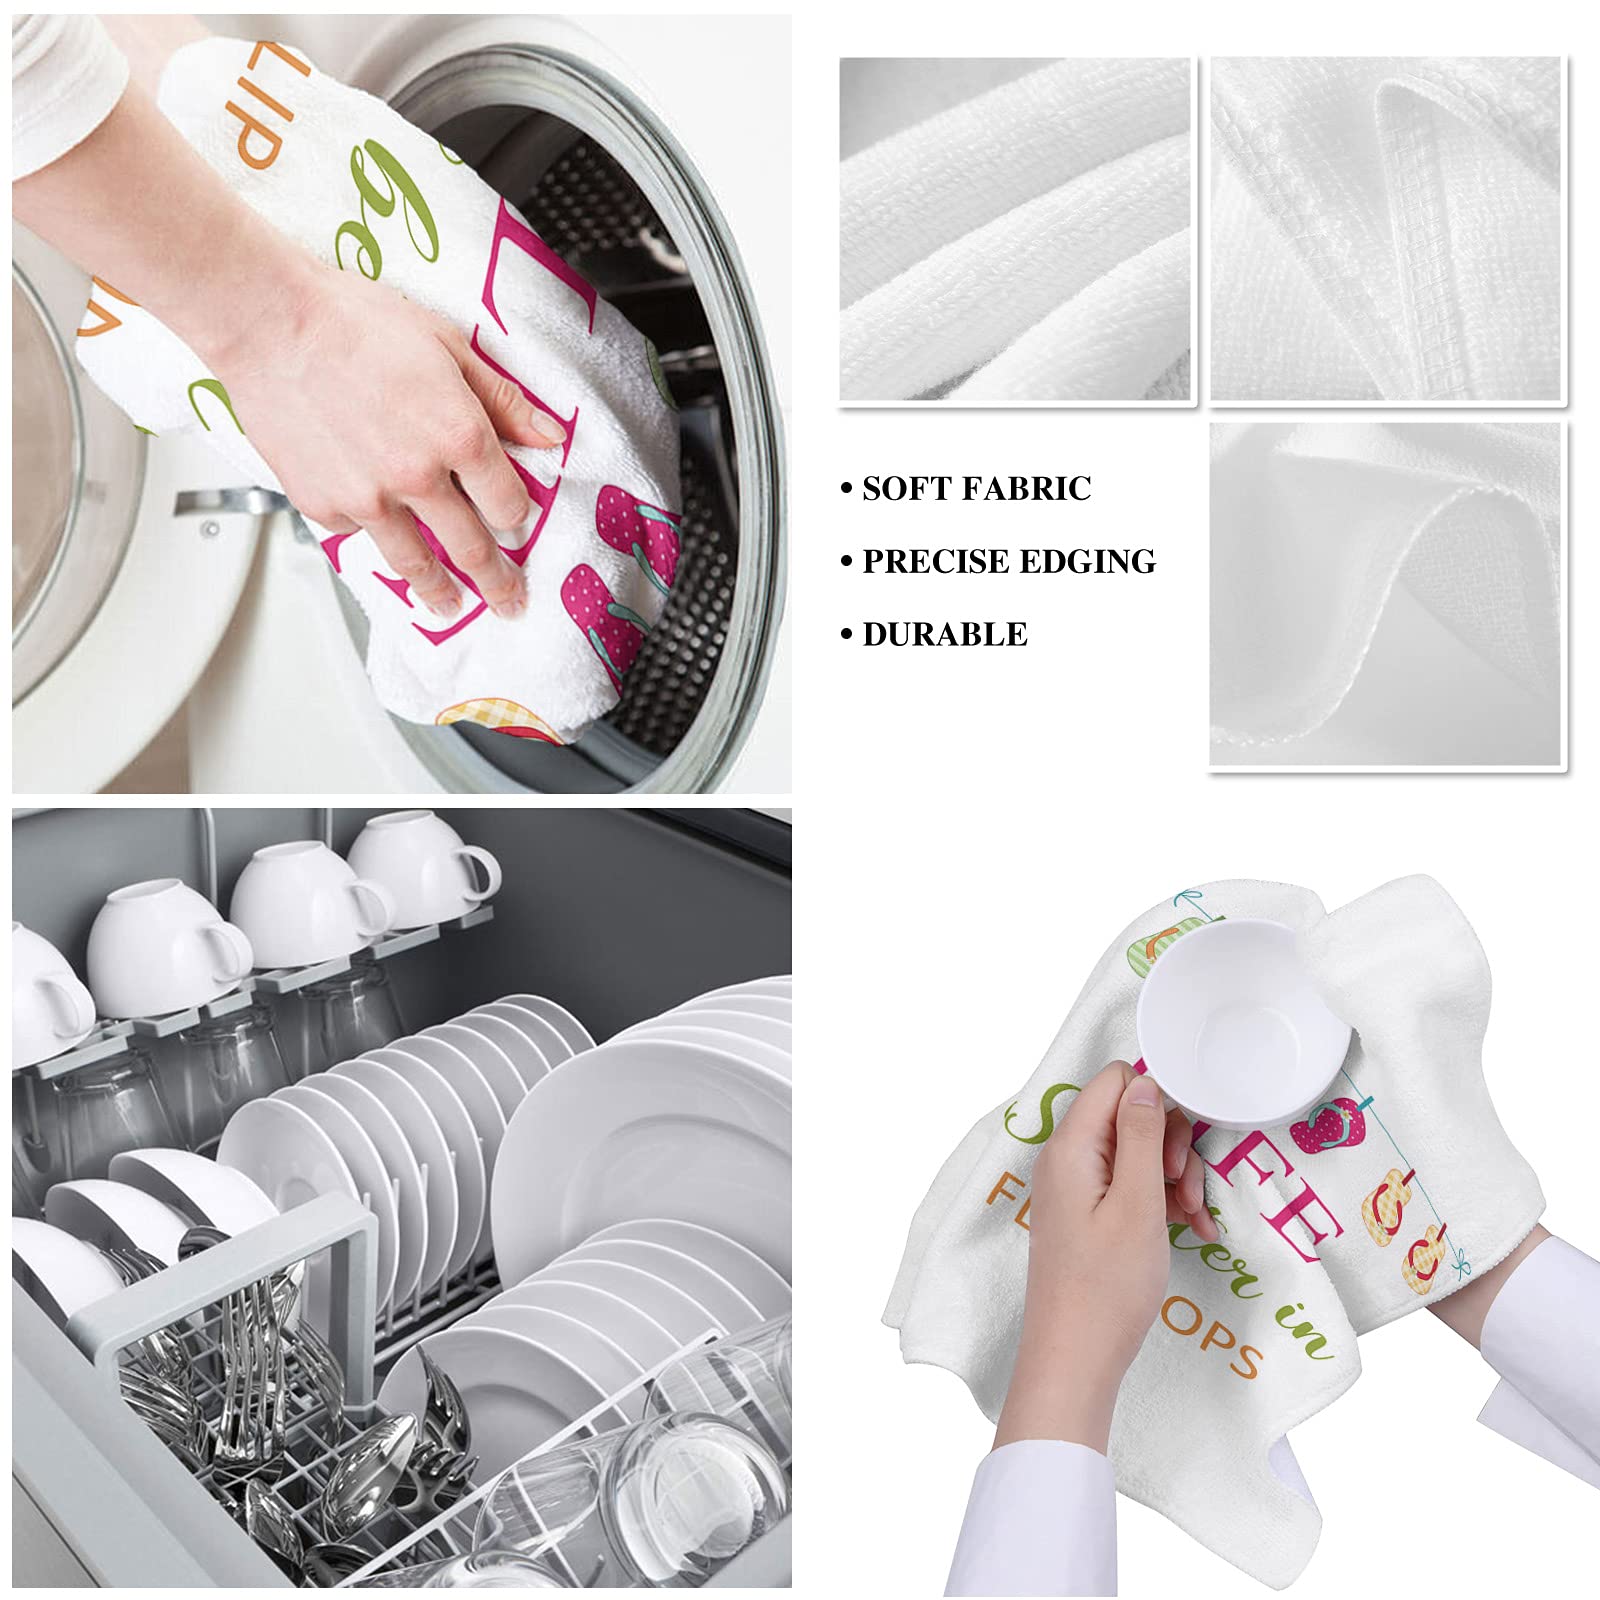 Kitchen Dish Towels 2 Pack-Super Absorbent Soft Microfiber,Life is Better in Flip Flops Colorful Slippers Cleaning Dishcloth Hand Towels Tea Towels for Kitchen Bathroom Bar